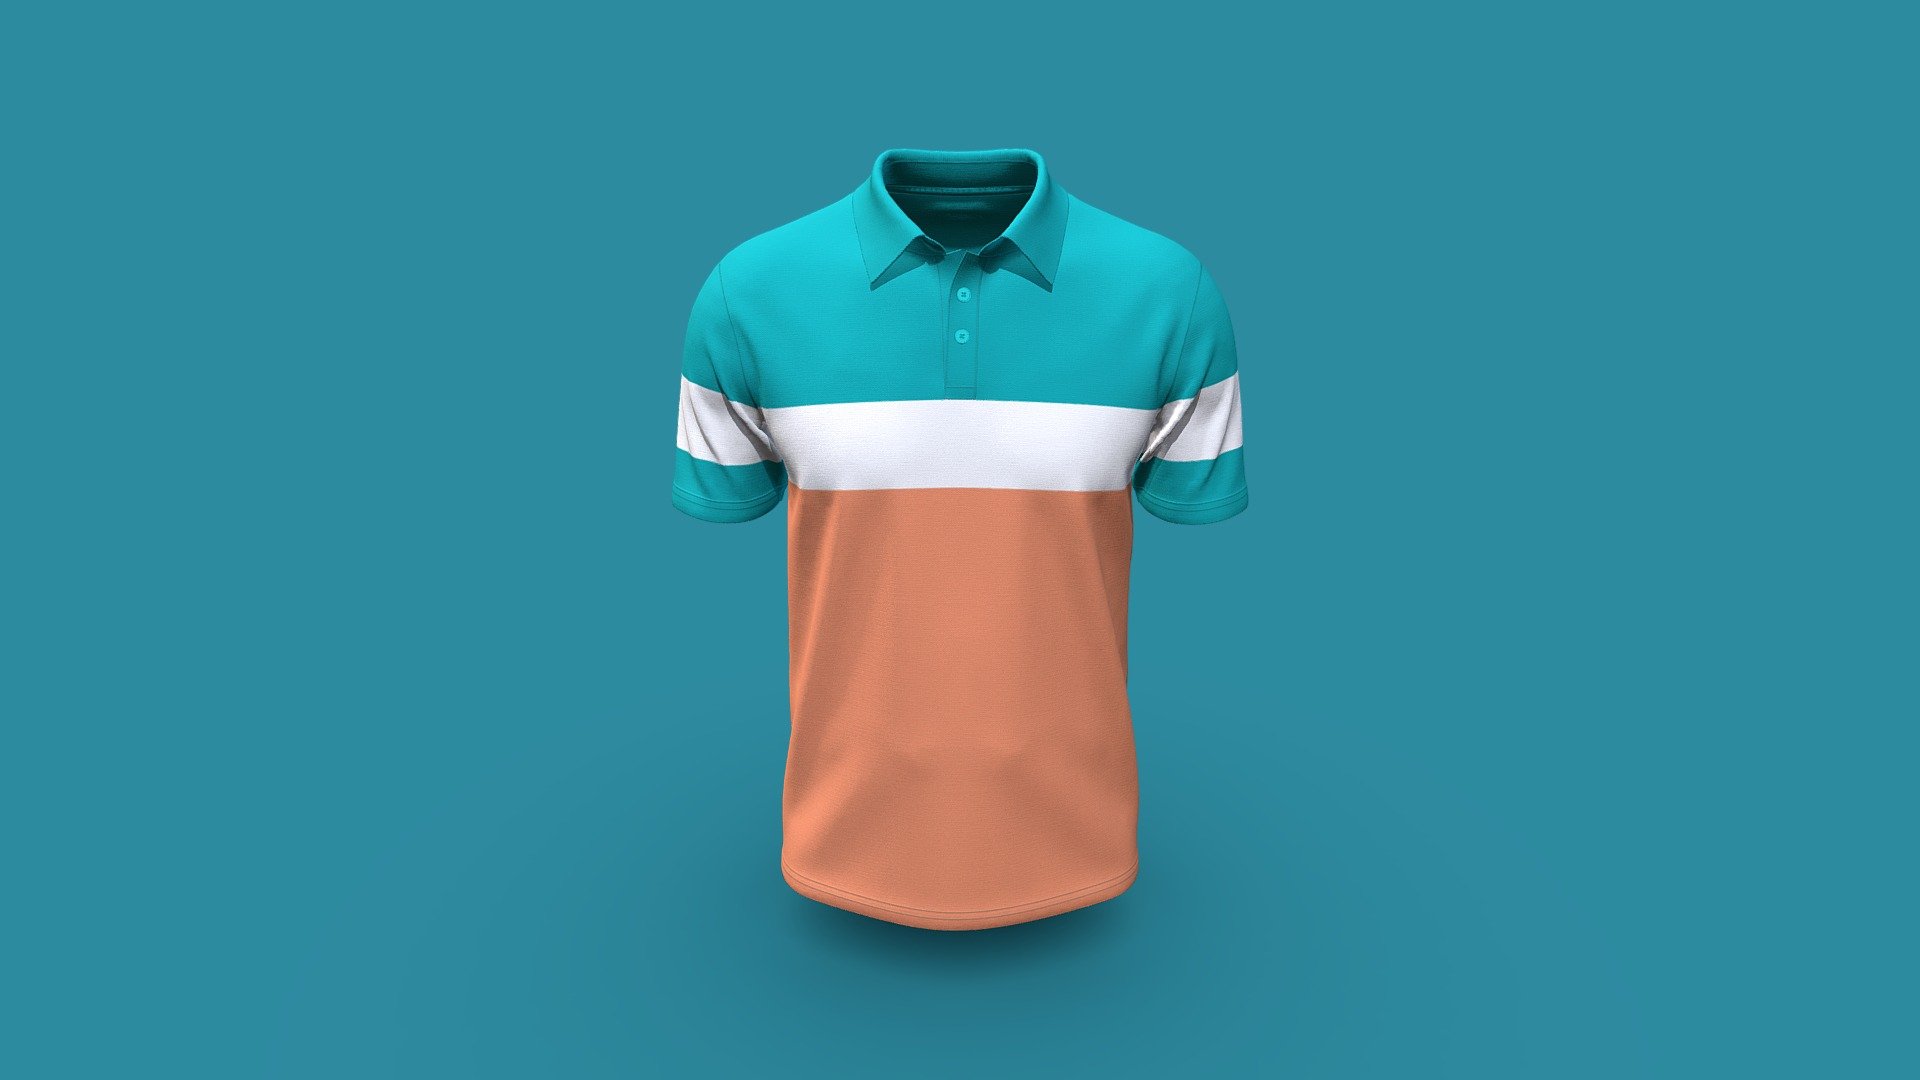 Cloth Title = Apparel Polo Design 

SKU = DG100202 

Category = Men 

Product Type = Polo 

Cloth Length = Regular 

Body Fit = Regular Fit 

Occasion = Casual  

Sleeve Style = Short Sleeve 


Our Services:

3D Apparel Design.

OBJ,FBX,GLTF Making with High/Low Poly.

Fabric Digitalization.

Mockup making.

3D Teck Pack.

Pattern Making.

2D Illustration.

Cloth Animation and 360 Spin Video.


Contact us:- 

Email: info@digitalfashionwear.com 

Website: https://digitalfashionwear.com 


We designed all the types of cloth specially focused on product visualization, e-commerce, fitting, and production. 

We will design: 

T-shirts 

Polo shirts 

Hoodies 

Sweatshirt 

Jackets 

Shirts 

TankTops 

Trousers 

Bras 

Underwear 

Blazer 

Aprons 

Leggings 

and All Fashion items. 





Our goal is to make sure what we provide you, meets your demand 3d model